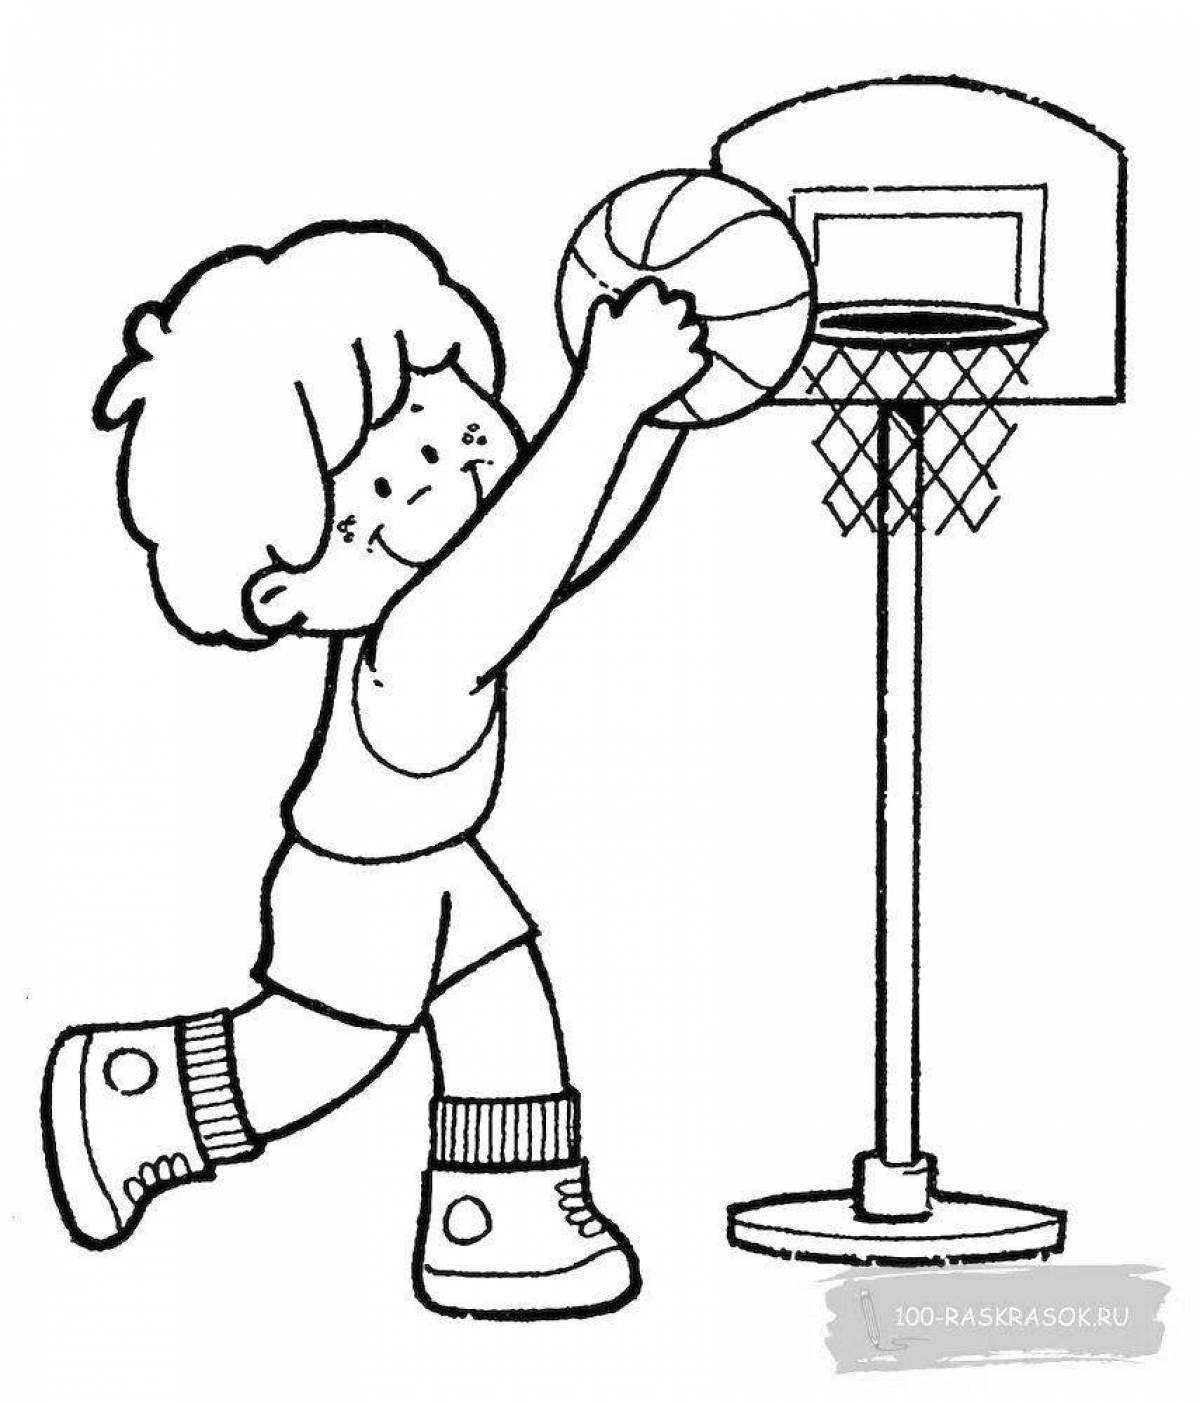 Colorful coloring book athletes of various sports for children